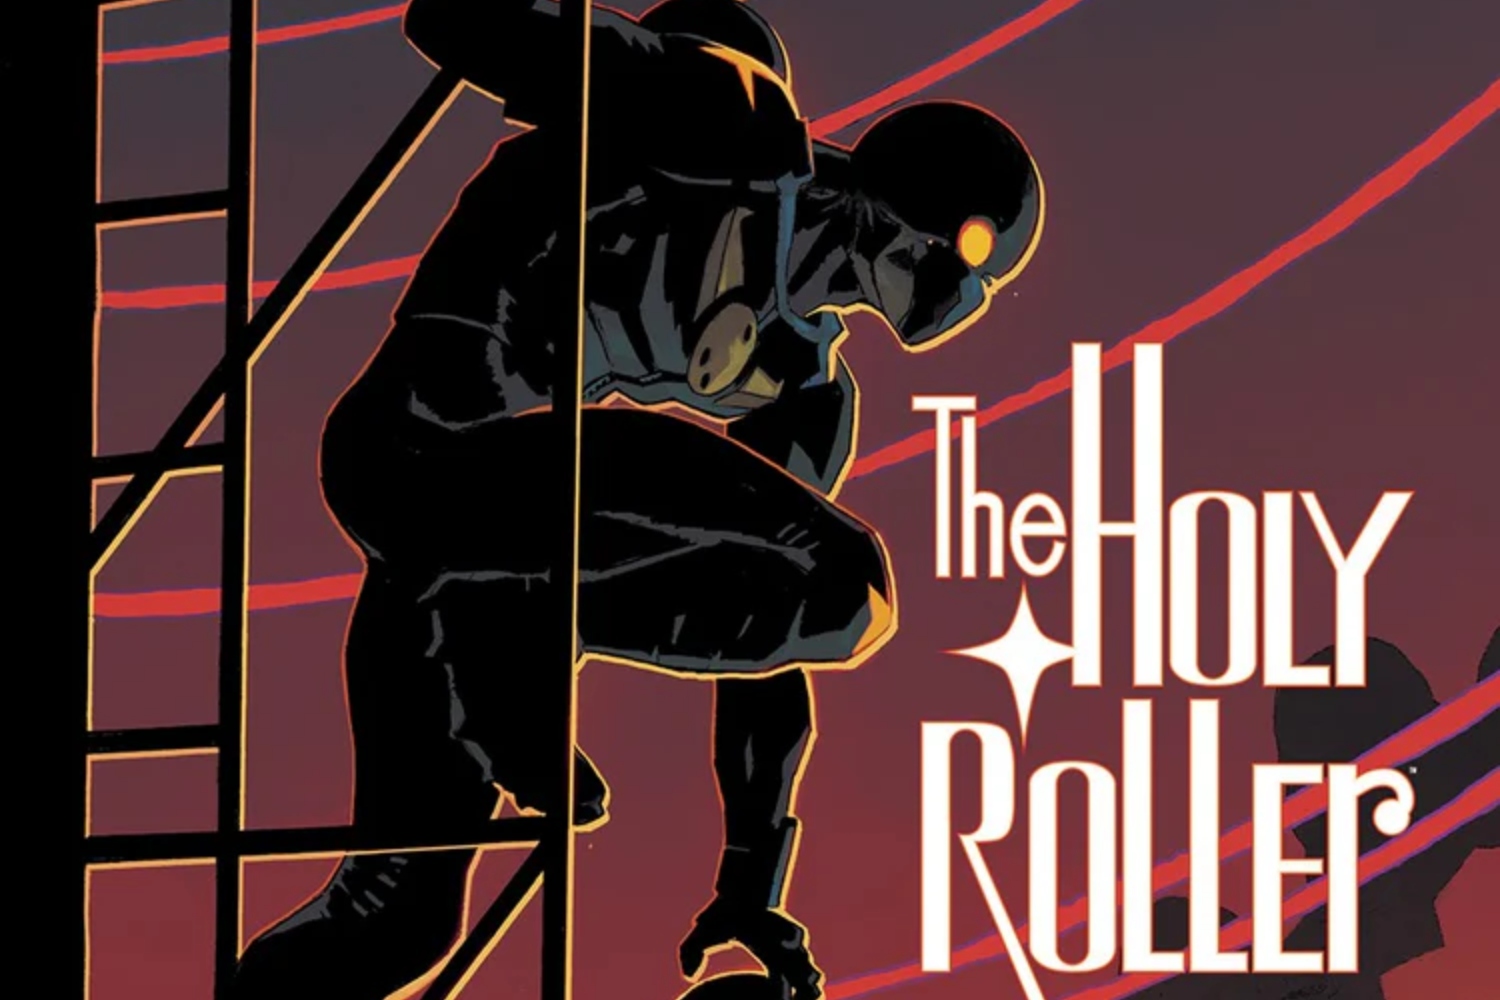 'The Holy Roller' #7 sets up a big victory for the story's final frames